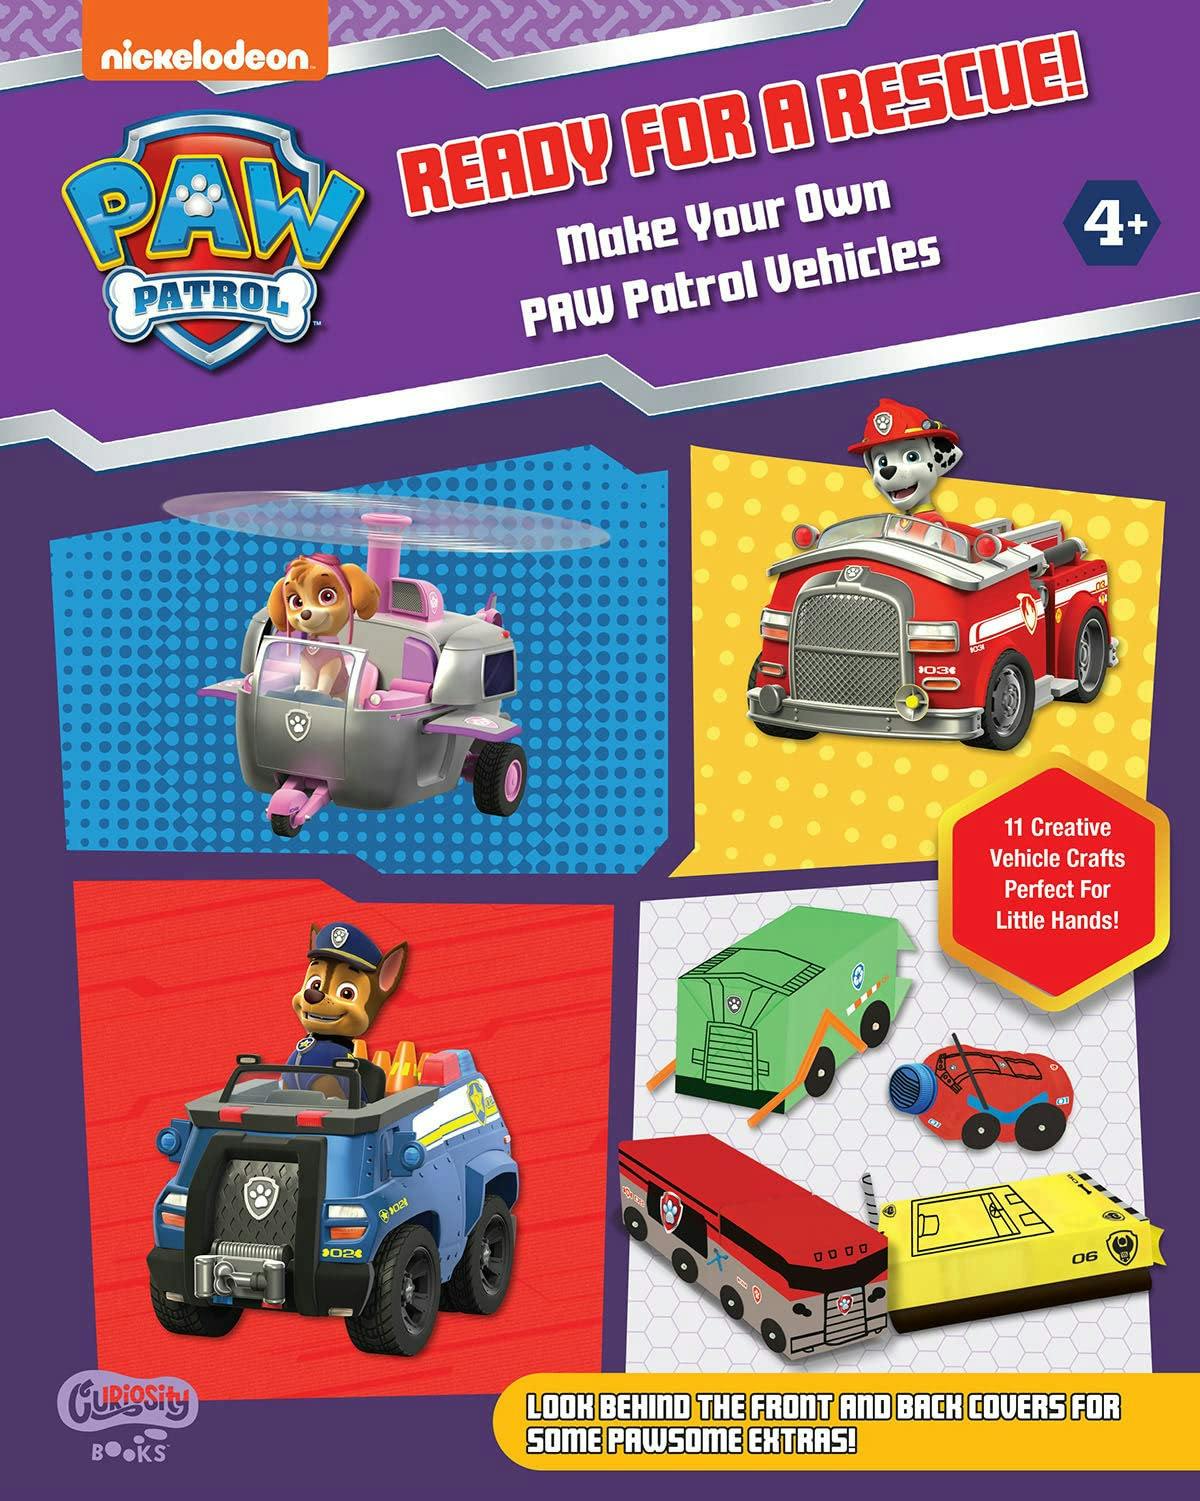 READY FOR A RESCUE! Make Your Own PAW Patrol Vehicles (paperback)